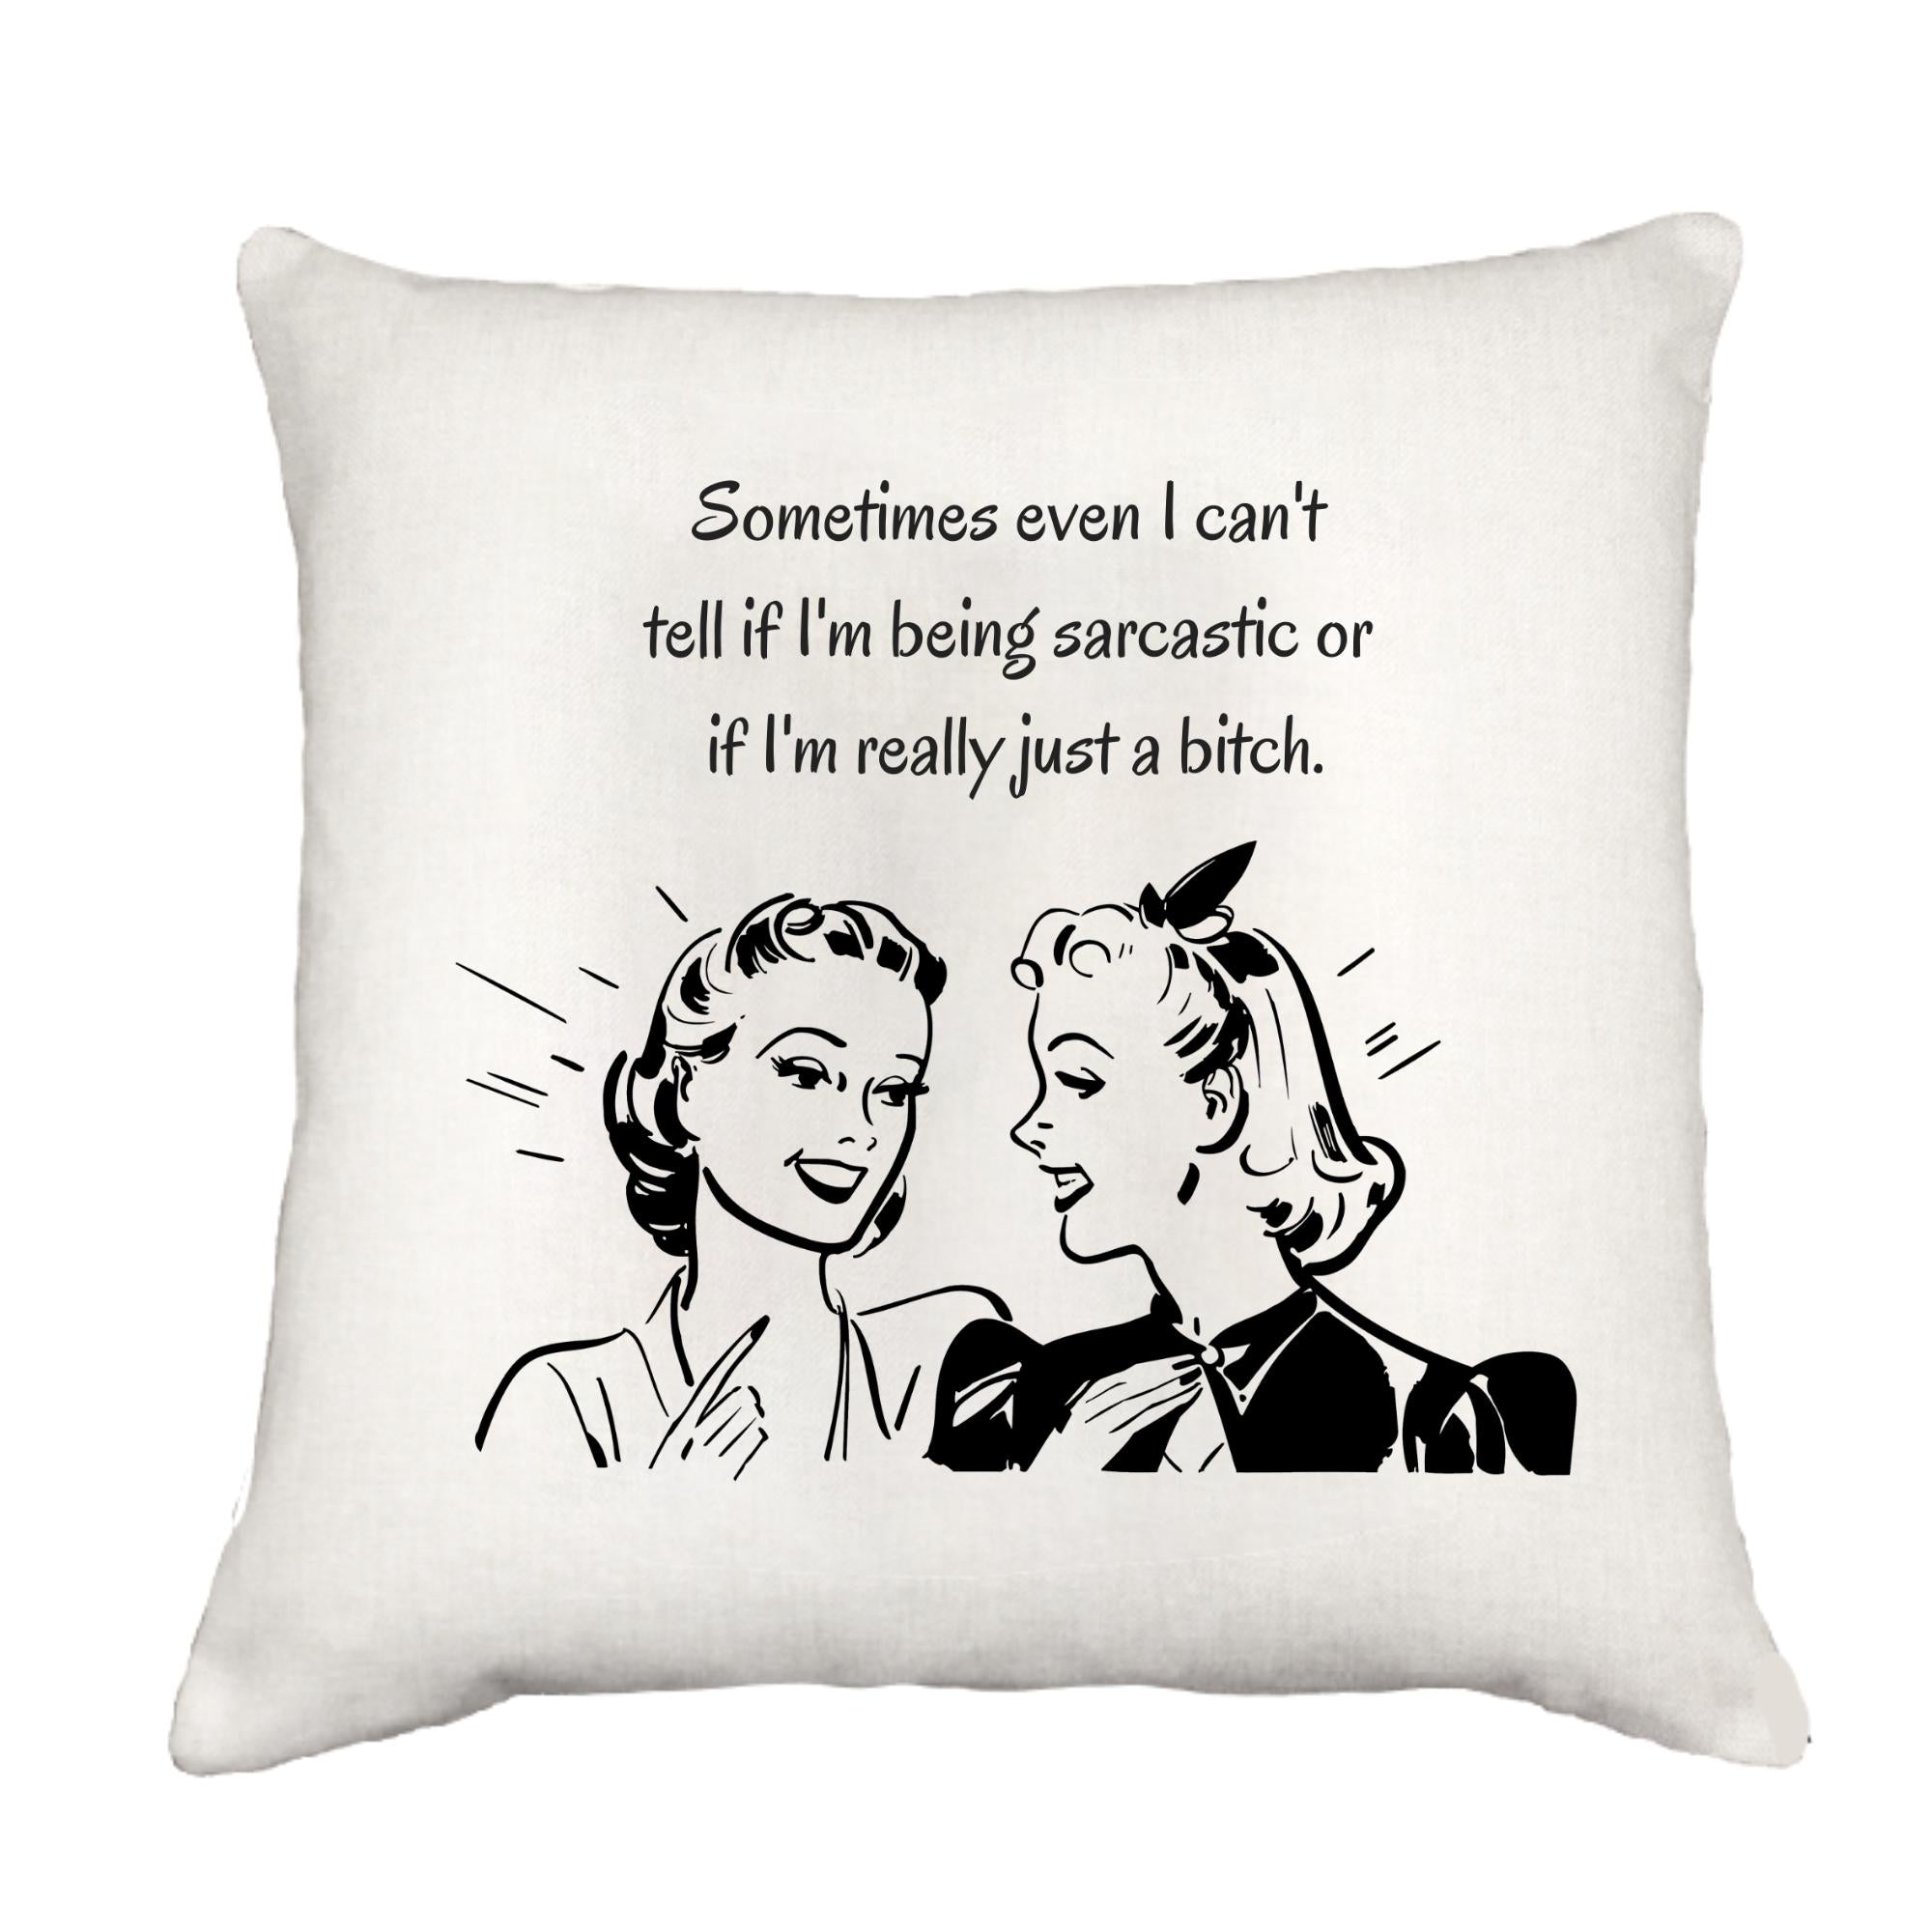 Being Sarcastic Cottage Pillow Throw/Decorative Pillow - Southern Sisters